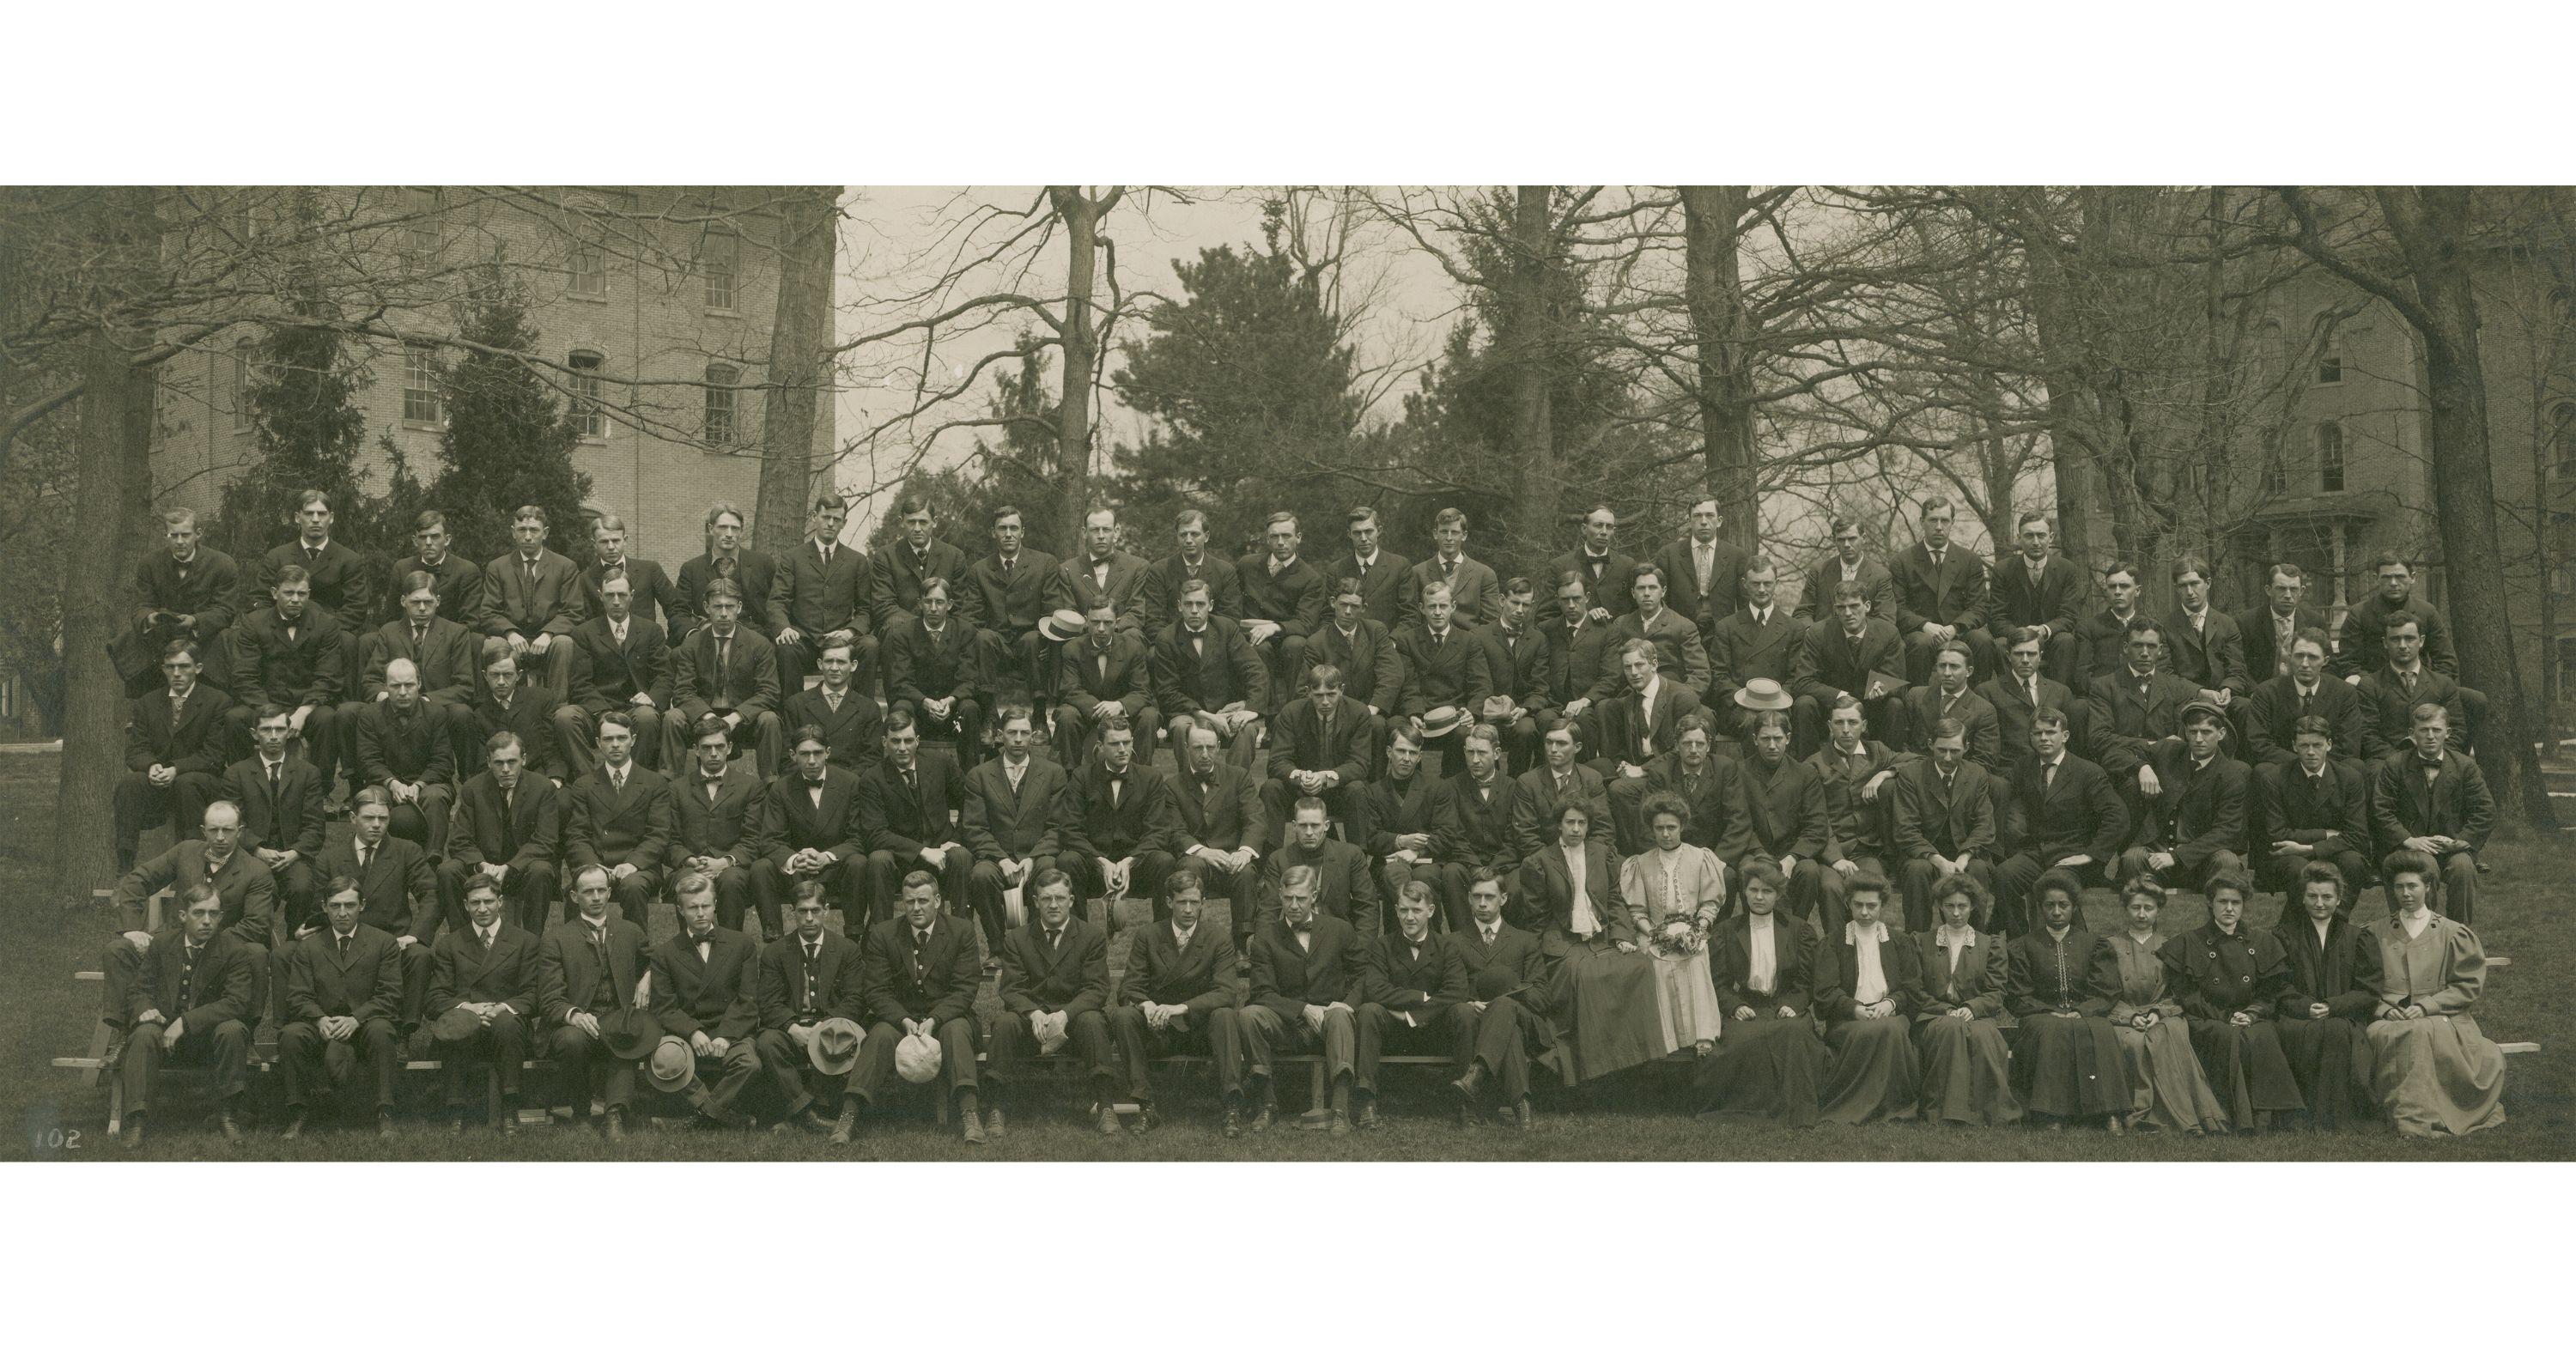 Photograph of 1907 class with Myrtle Craig Mowbray.